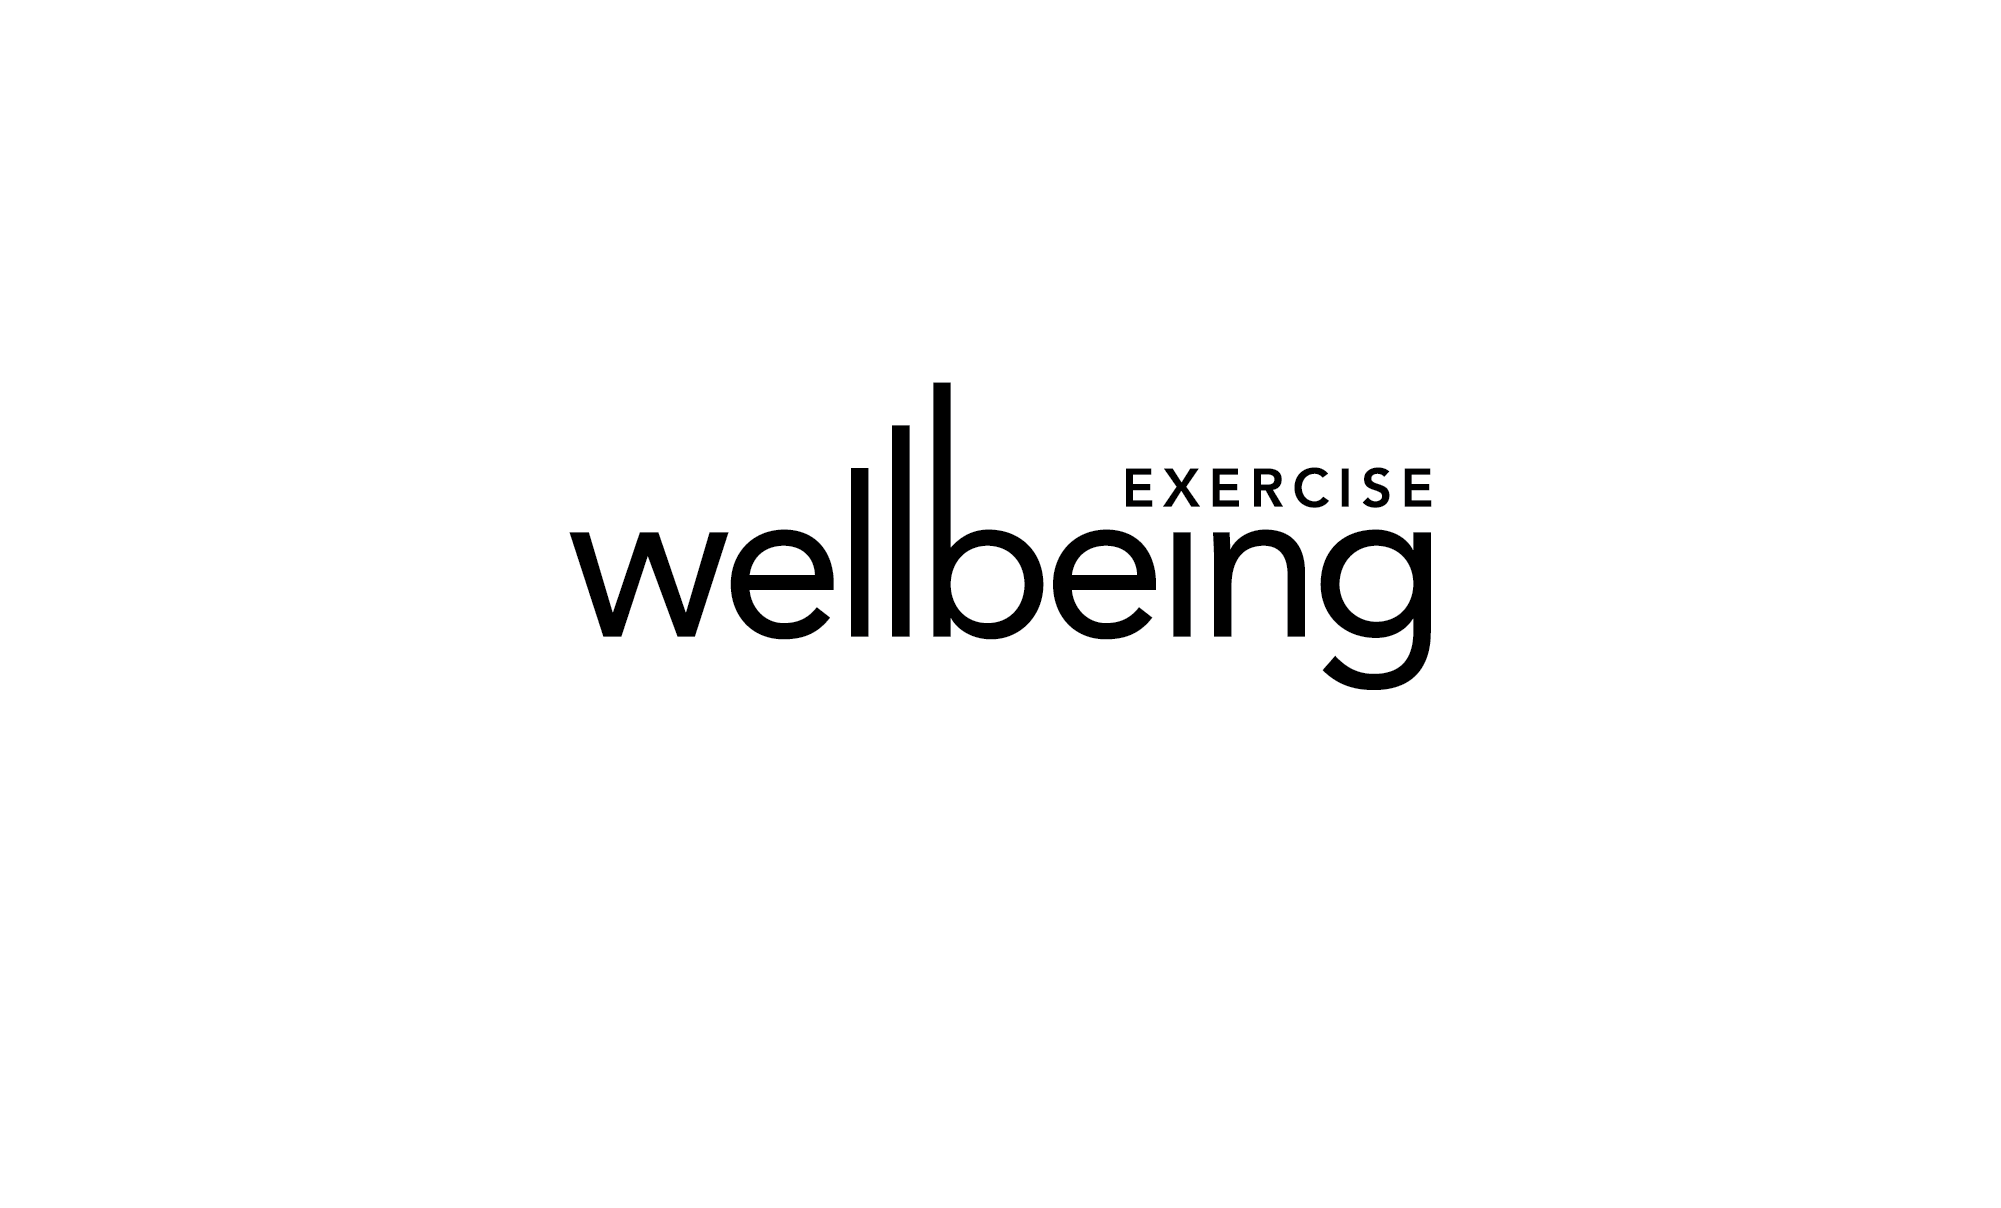 Wellbeing exercise